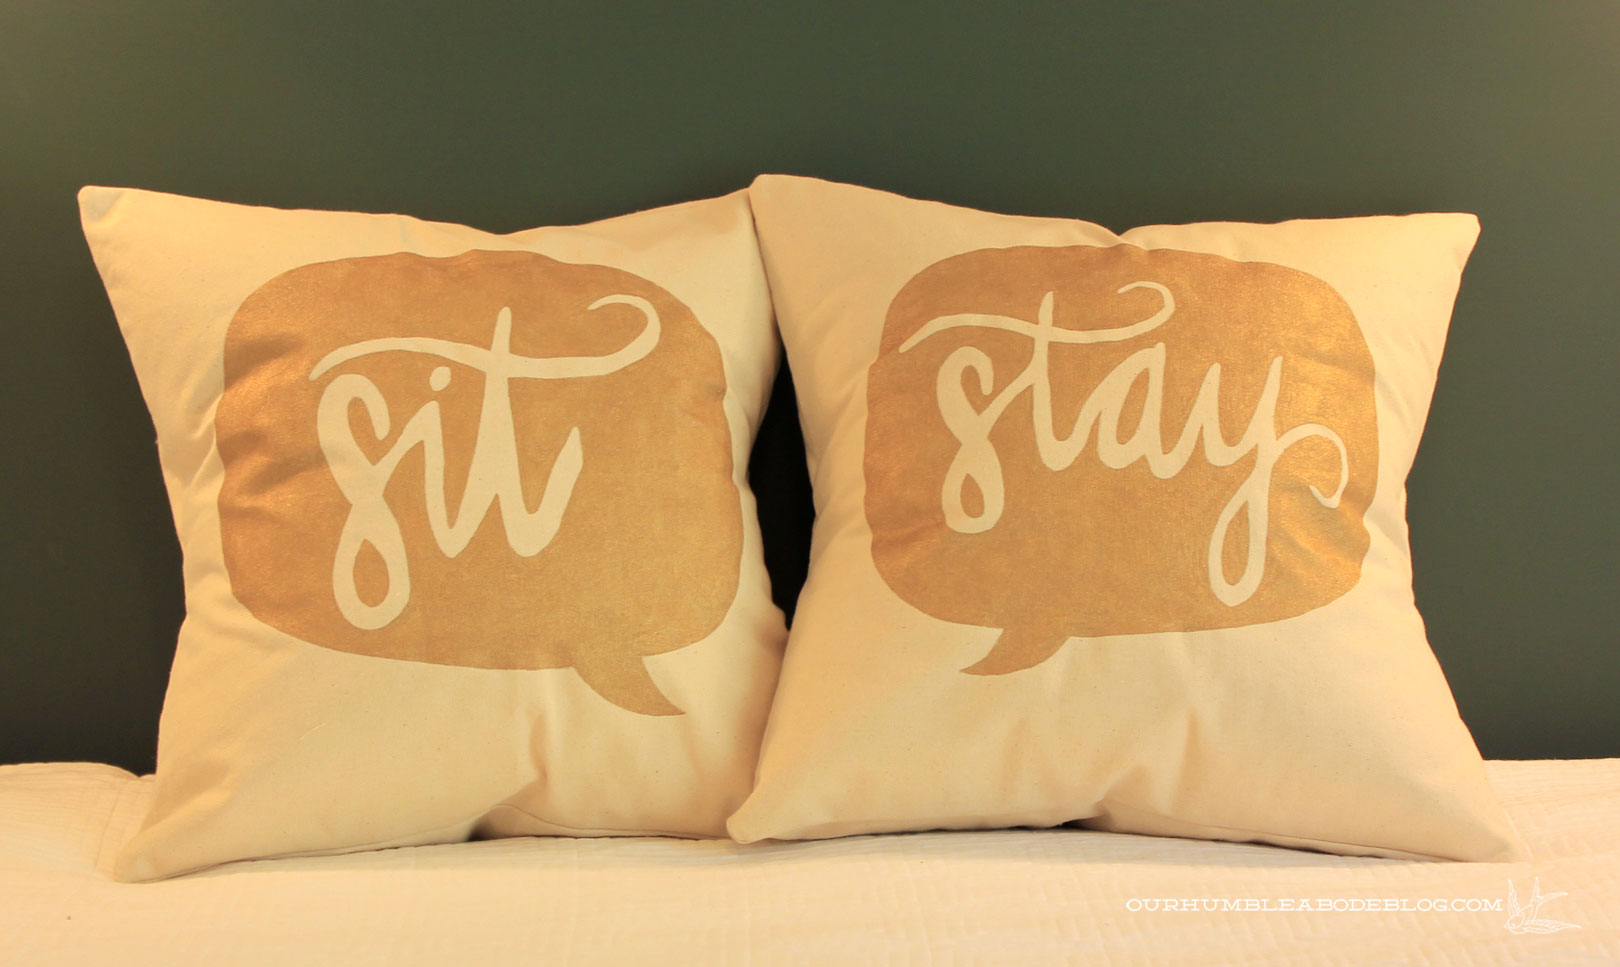 sit and stay pillows